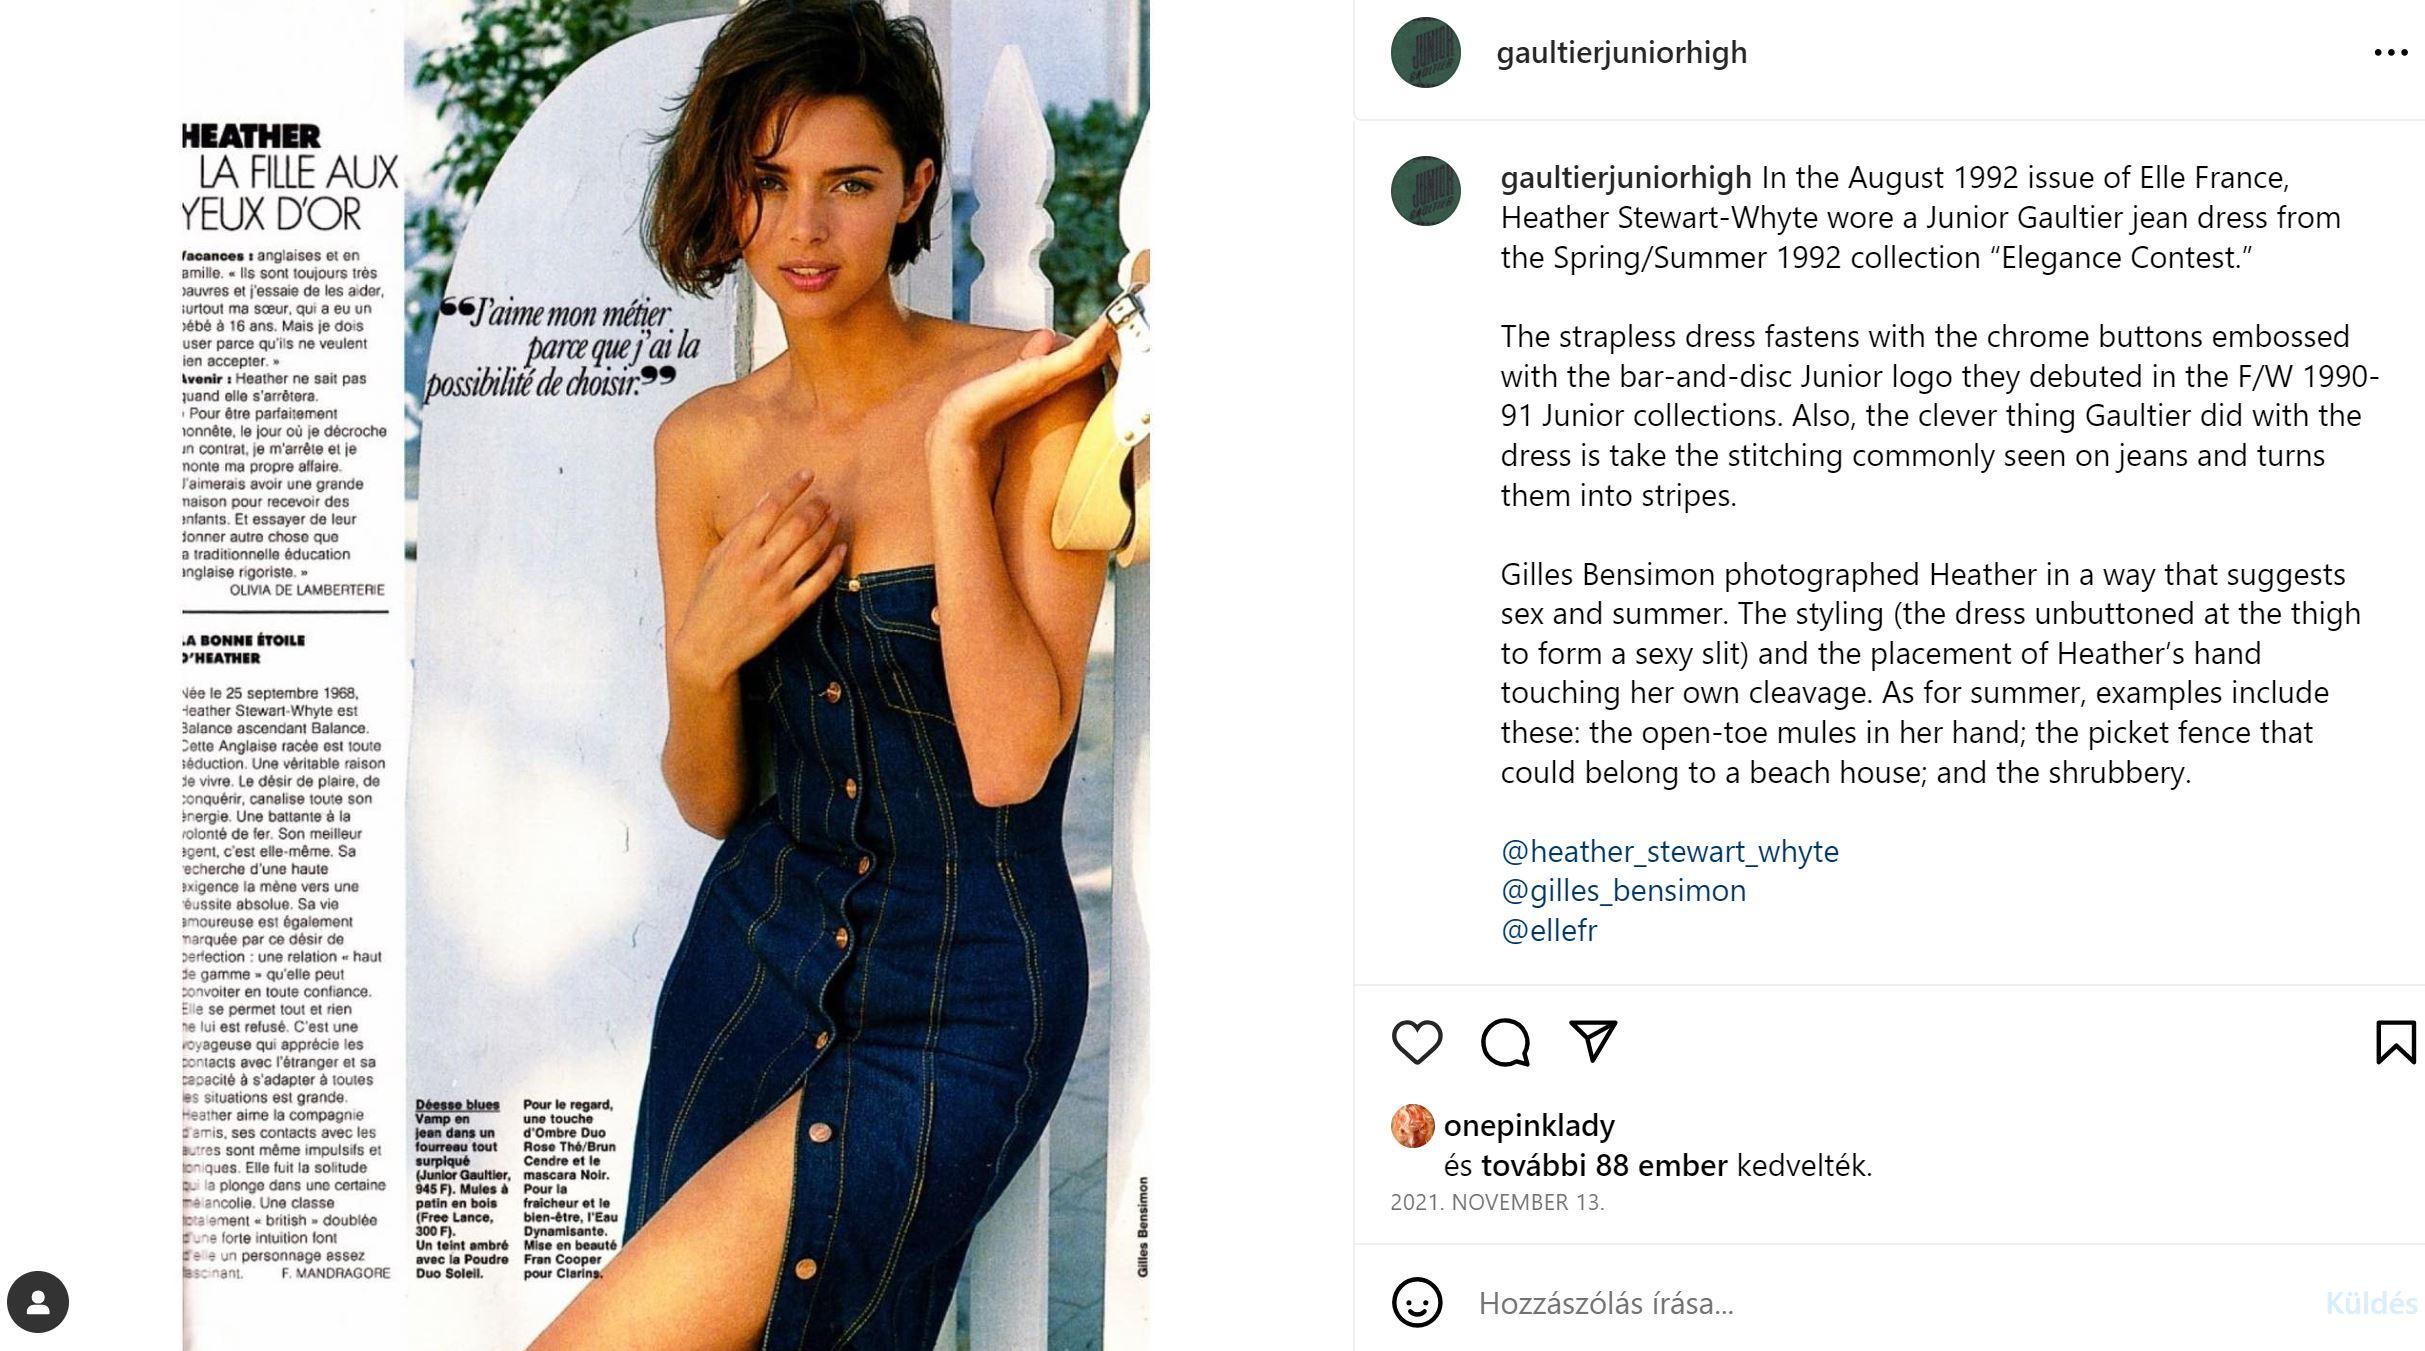 In the August 1992 issue of Elle France, Heather Stewart-Whyte wore a Junior Gaultier jean dress from the Spring/Summer 1992 collection “Elegance Contest.”

The strapless dress fastens with the chrome buttons embossed with the bar-and-disc Junior